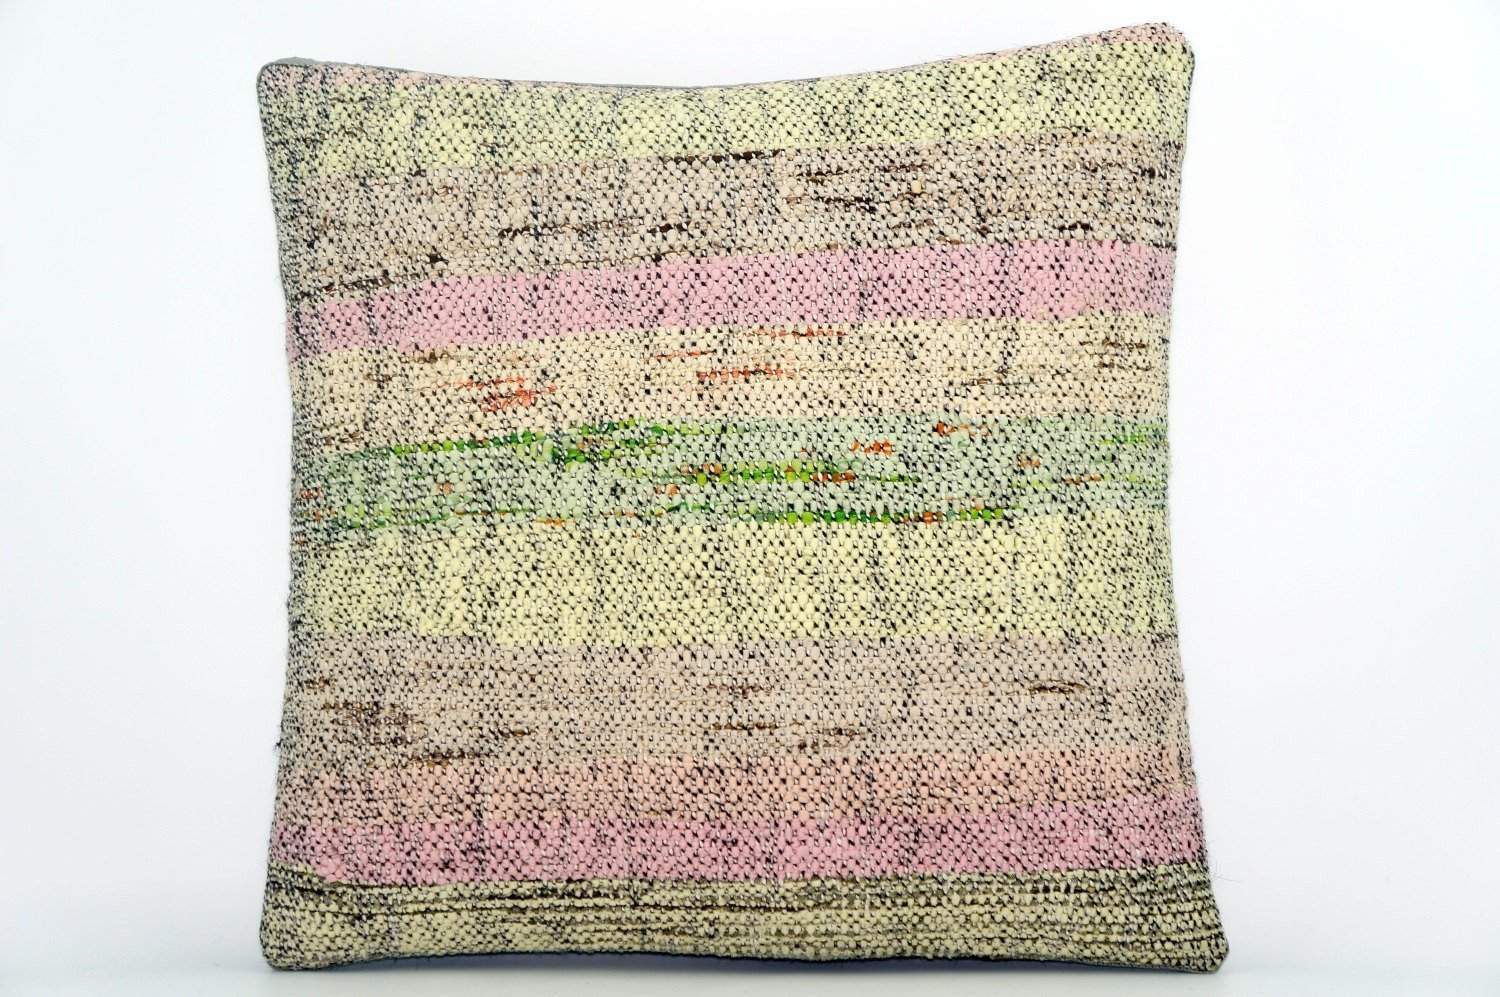 CLEARANCE Handwoven hemp pillow green pink yellow , Decorative Kilim pillow cover  1567_A - kilimpillowstore
 - 1